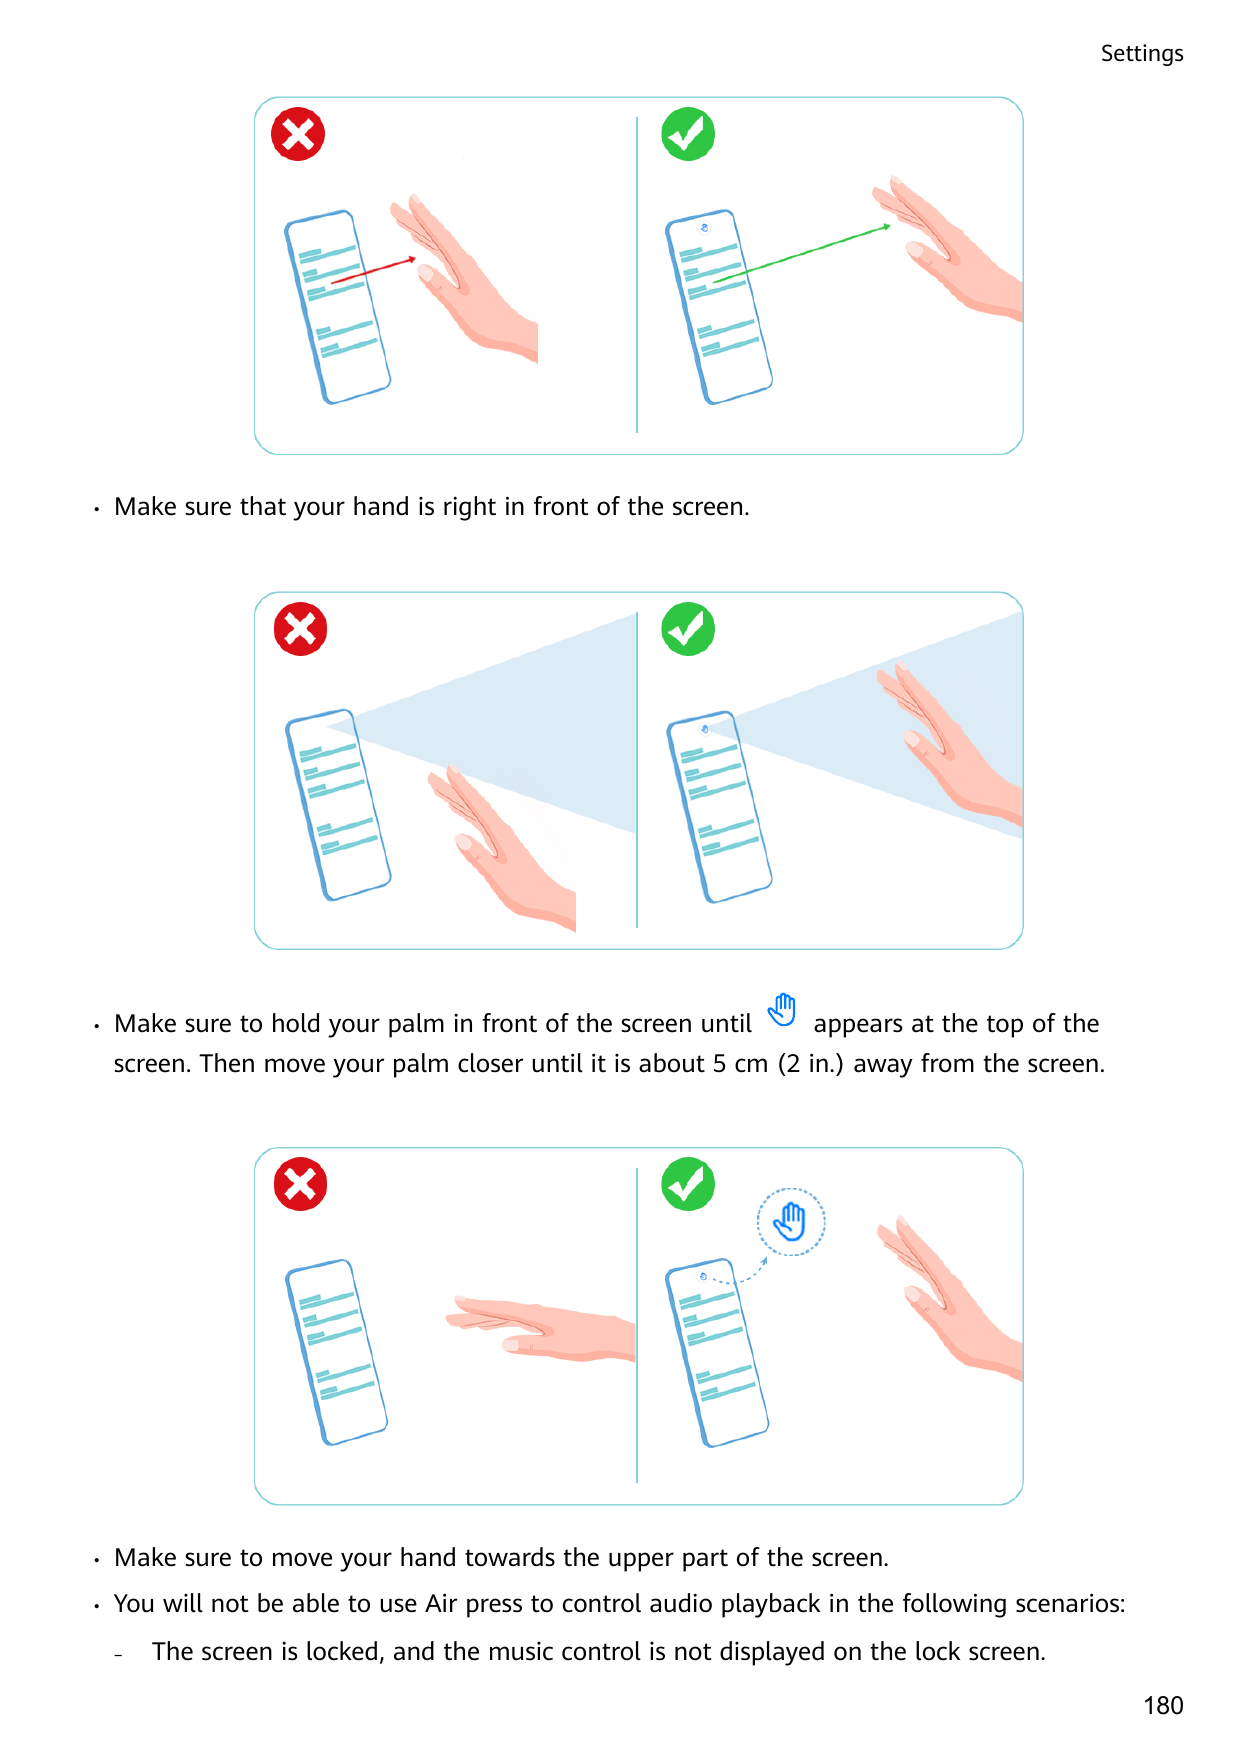 Settings•Make sure that your hand is right in front of the screen.•Make sure to hold your palm in front of the screen untilappea